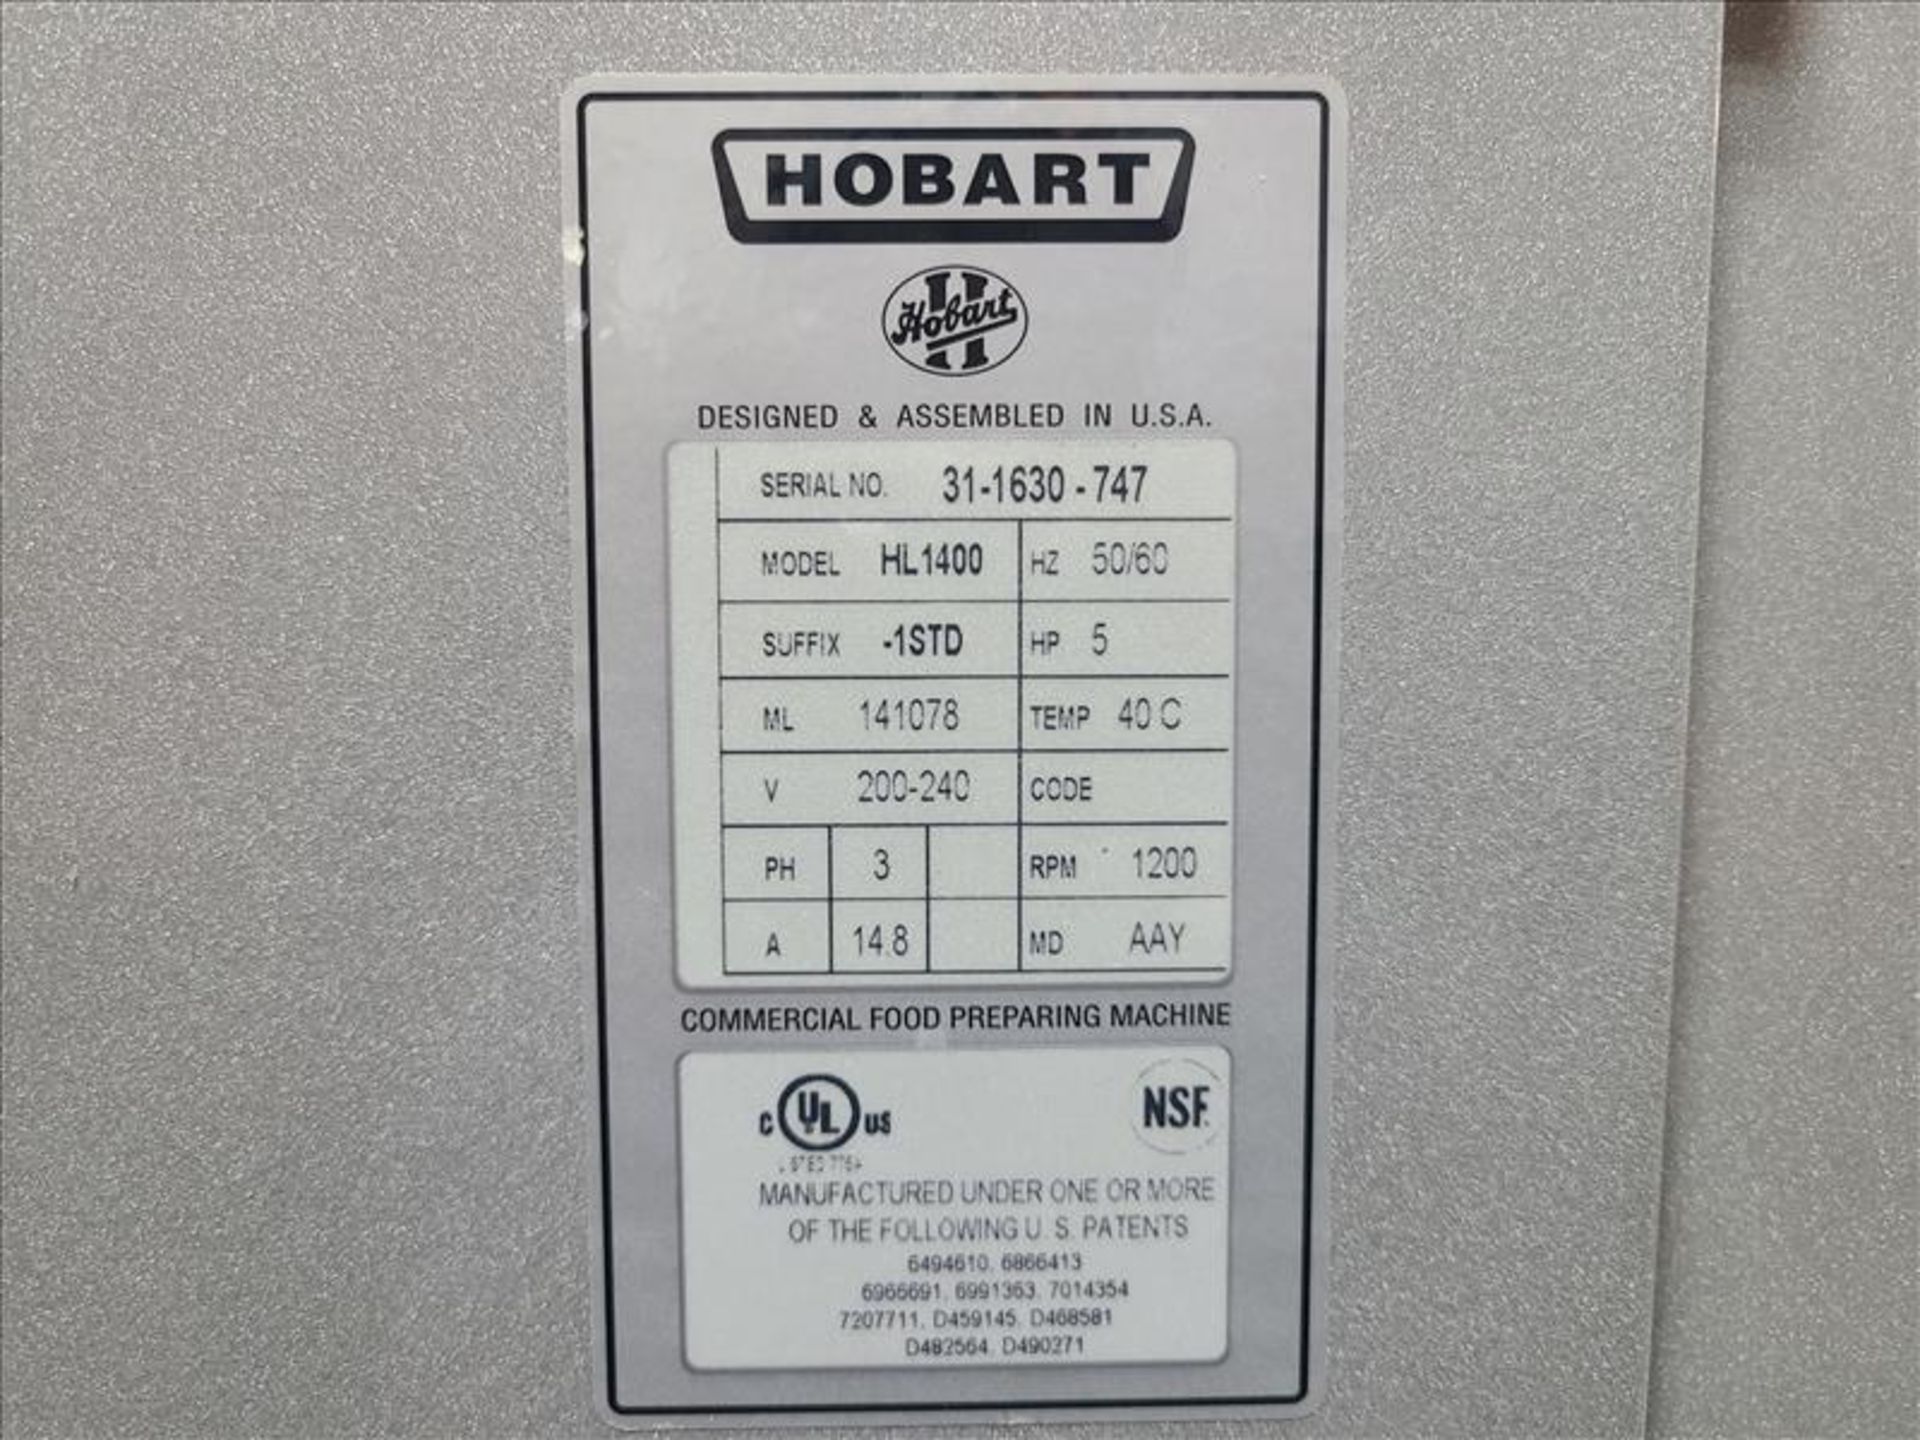 Hobart Legacy Planetary Floor Mixer, mod. HL-1400, (New, Never Installed)ser. no. 31-1630-747, 140 - Image 8 of 9